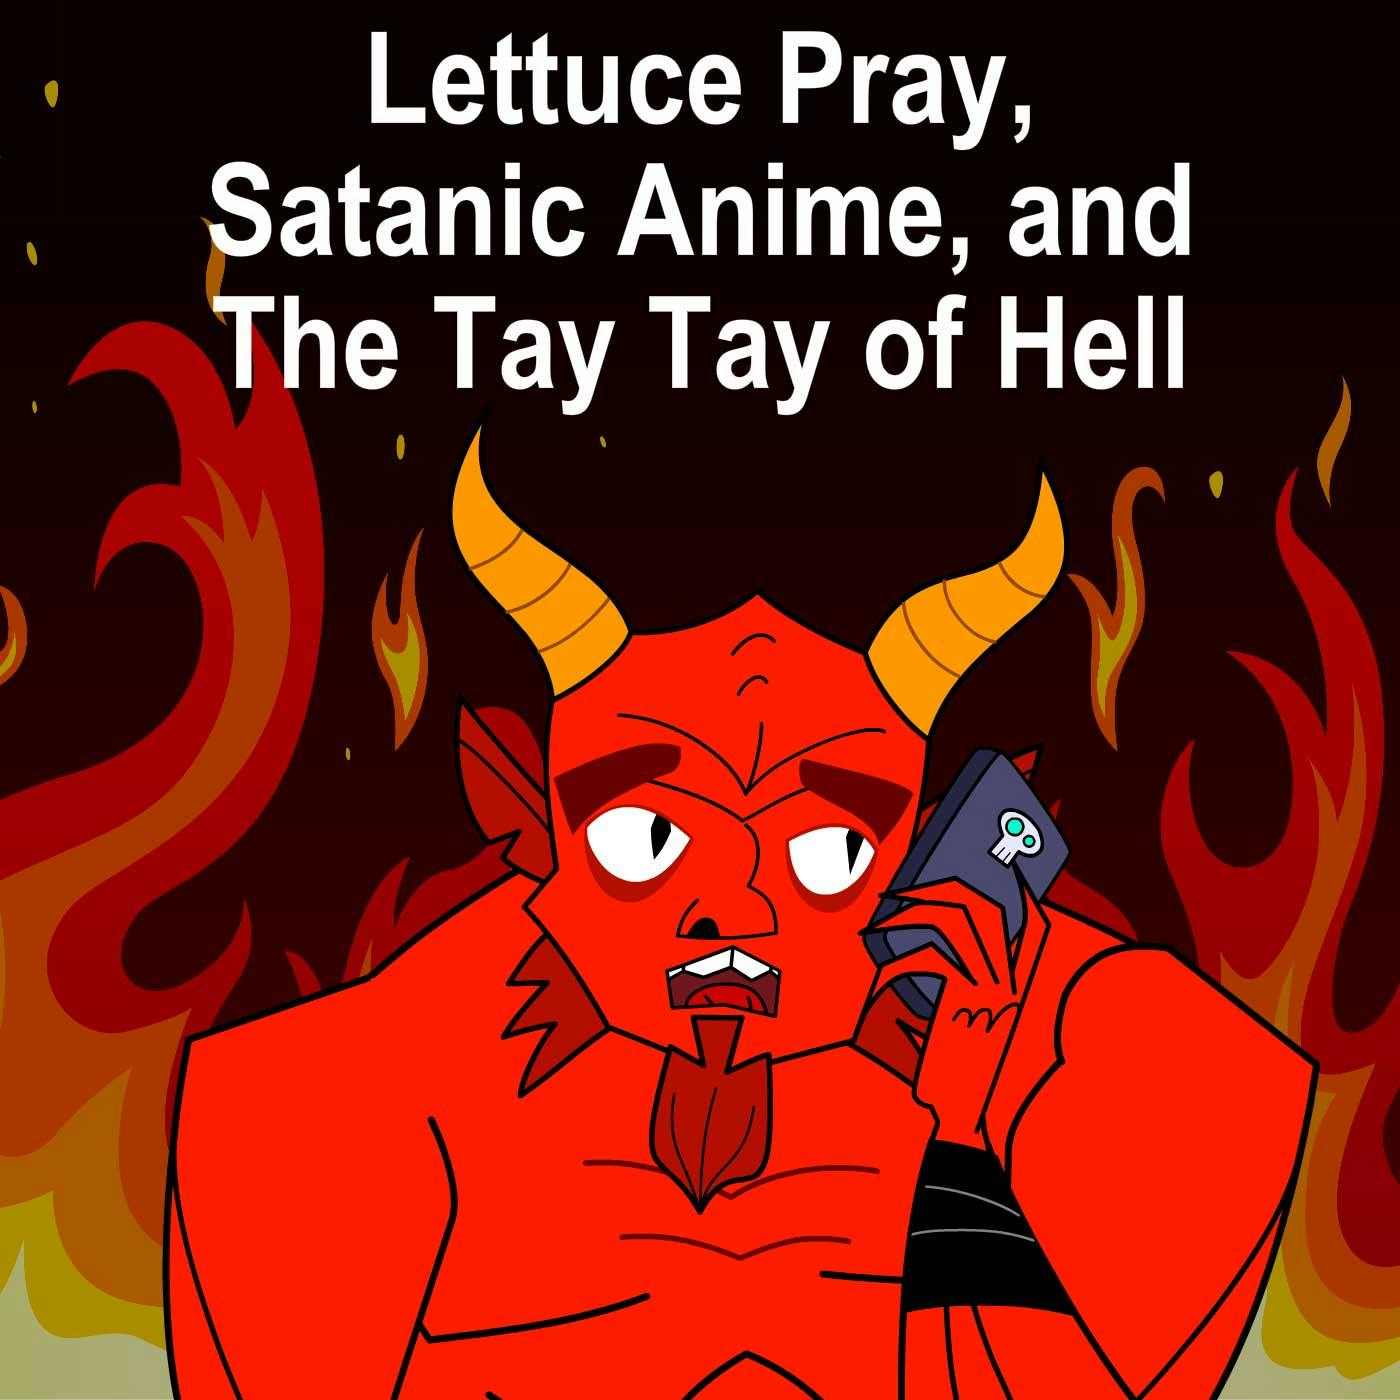 Lettuce Pray, Satanic Anime, and The Tay Tay of Hell